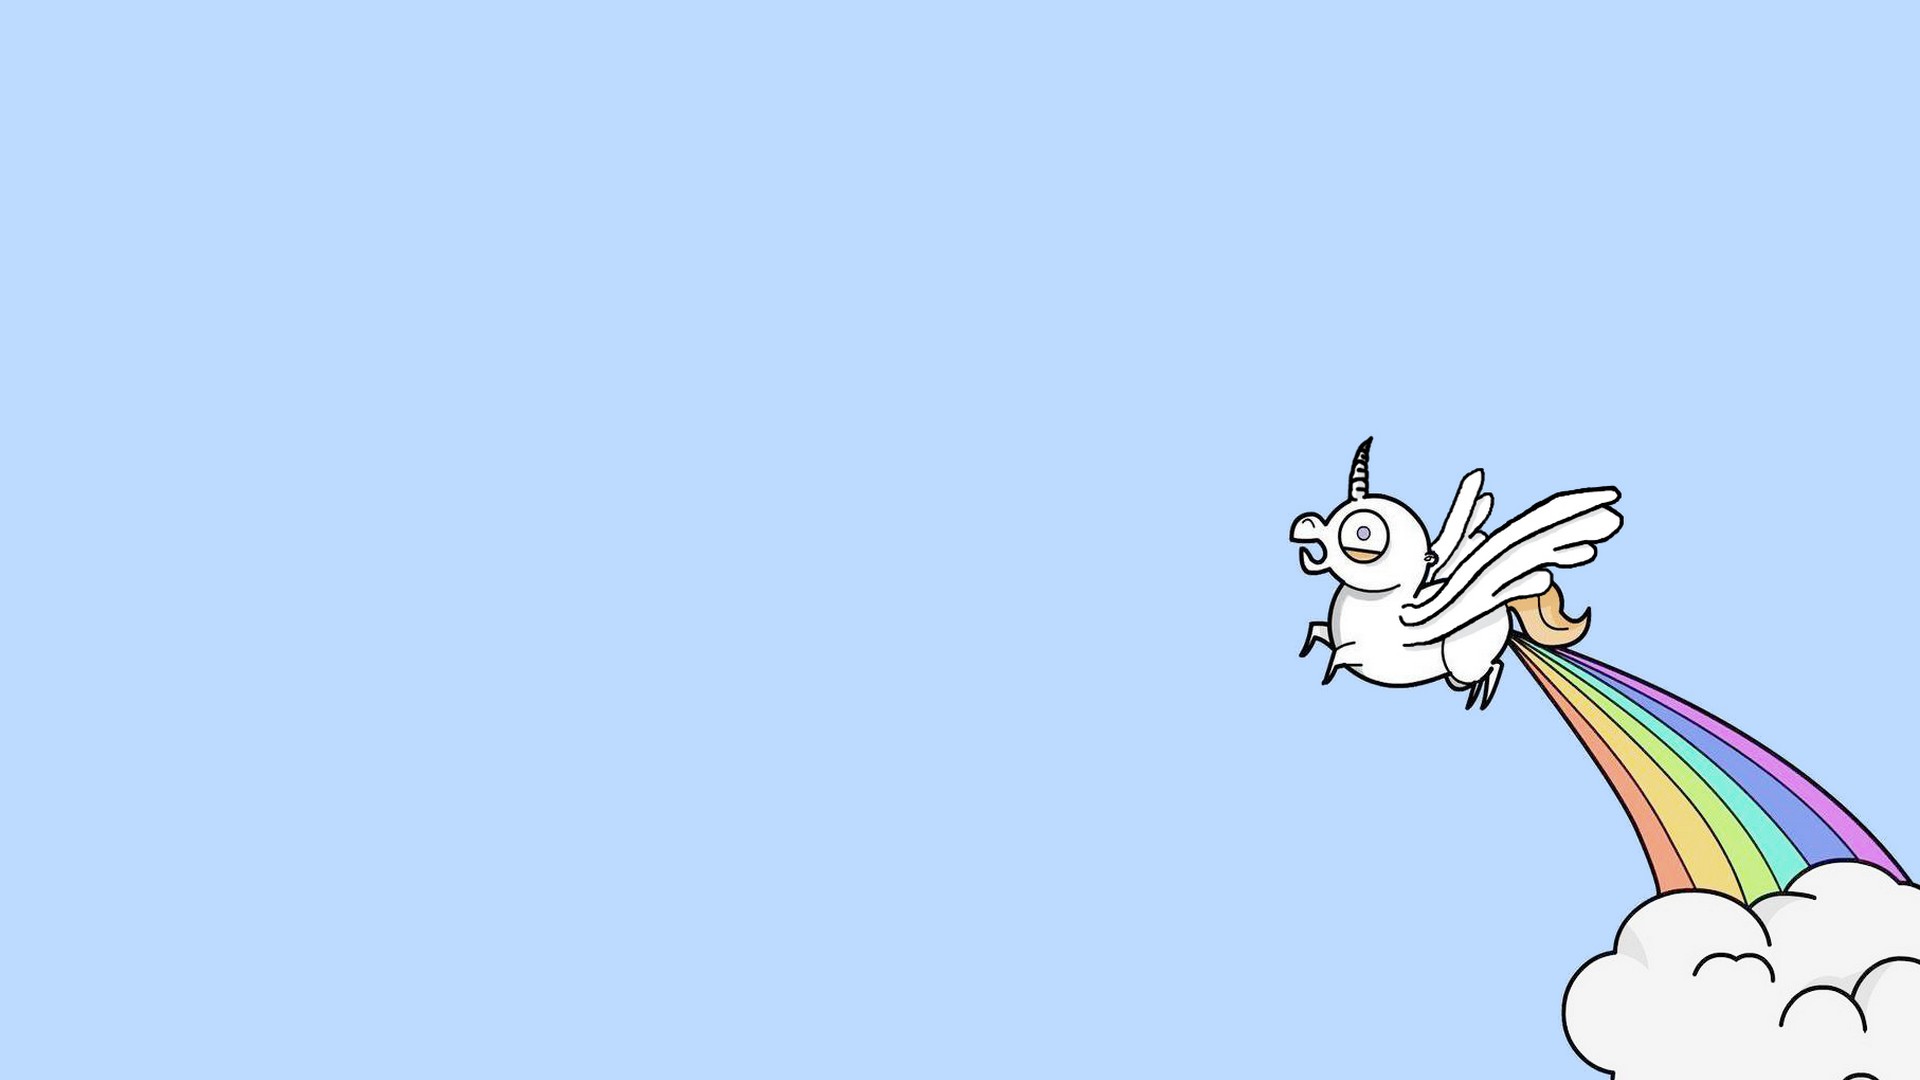 Best Unicorn Wallpaper with high-resolution 1920x1080 pixel. You can use this wallpaper for your Windows and Mac OS computers as well as your Android and iPhone smartphones